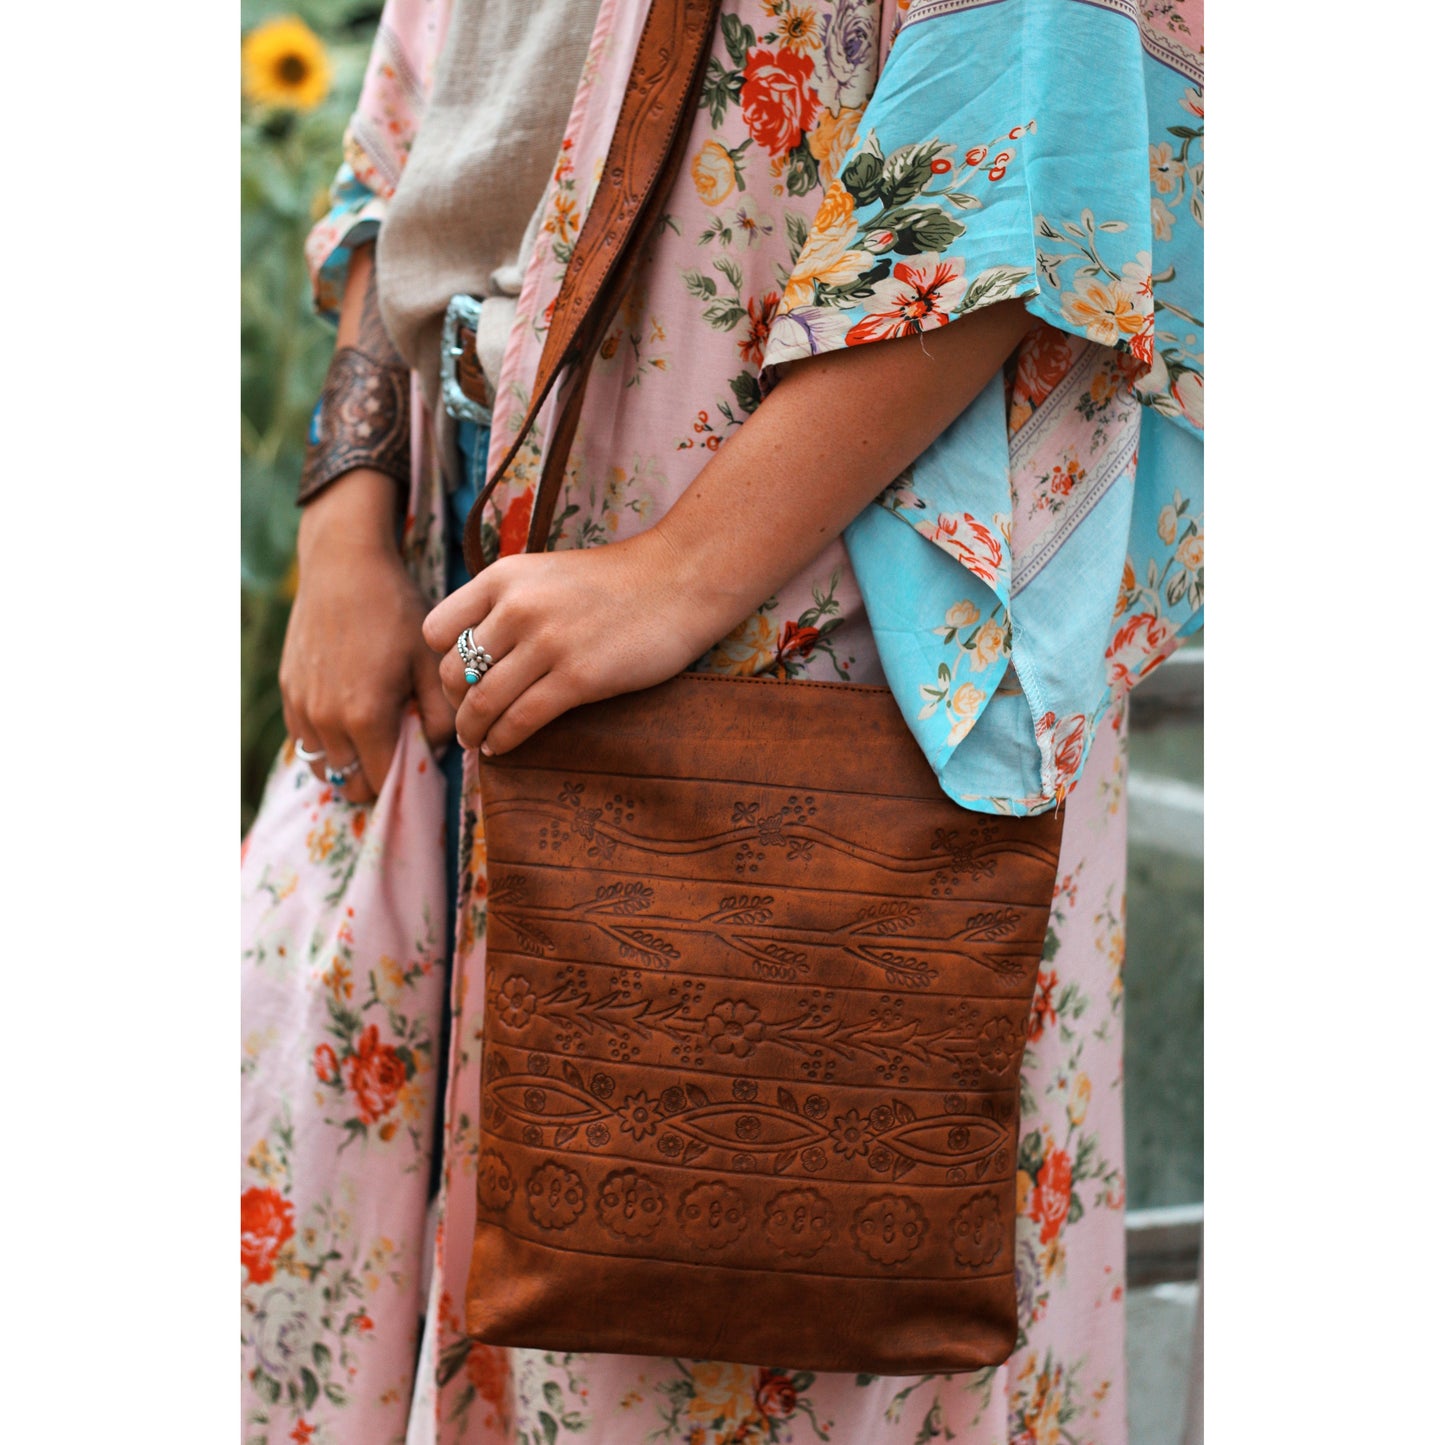 Small Wildflowers Bag SALE $175 now $100